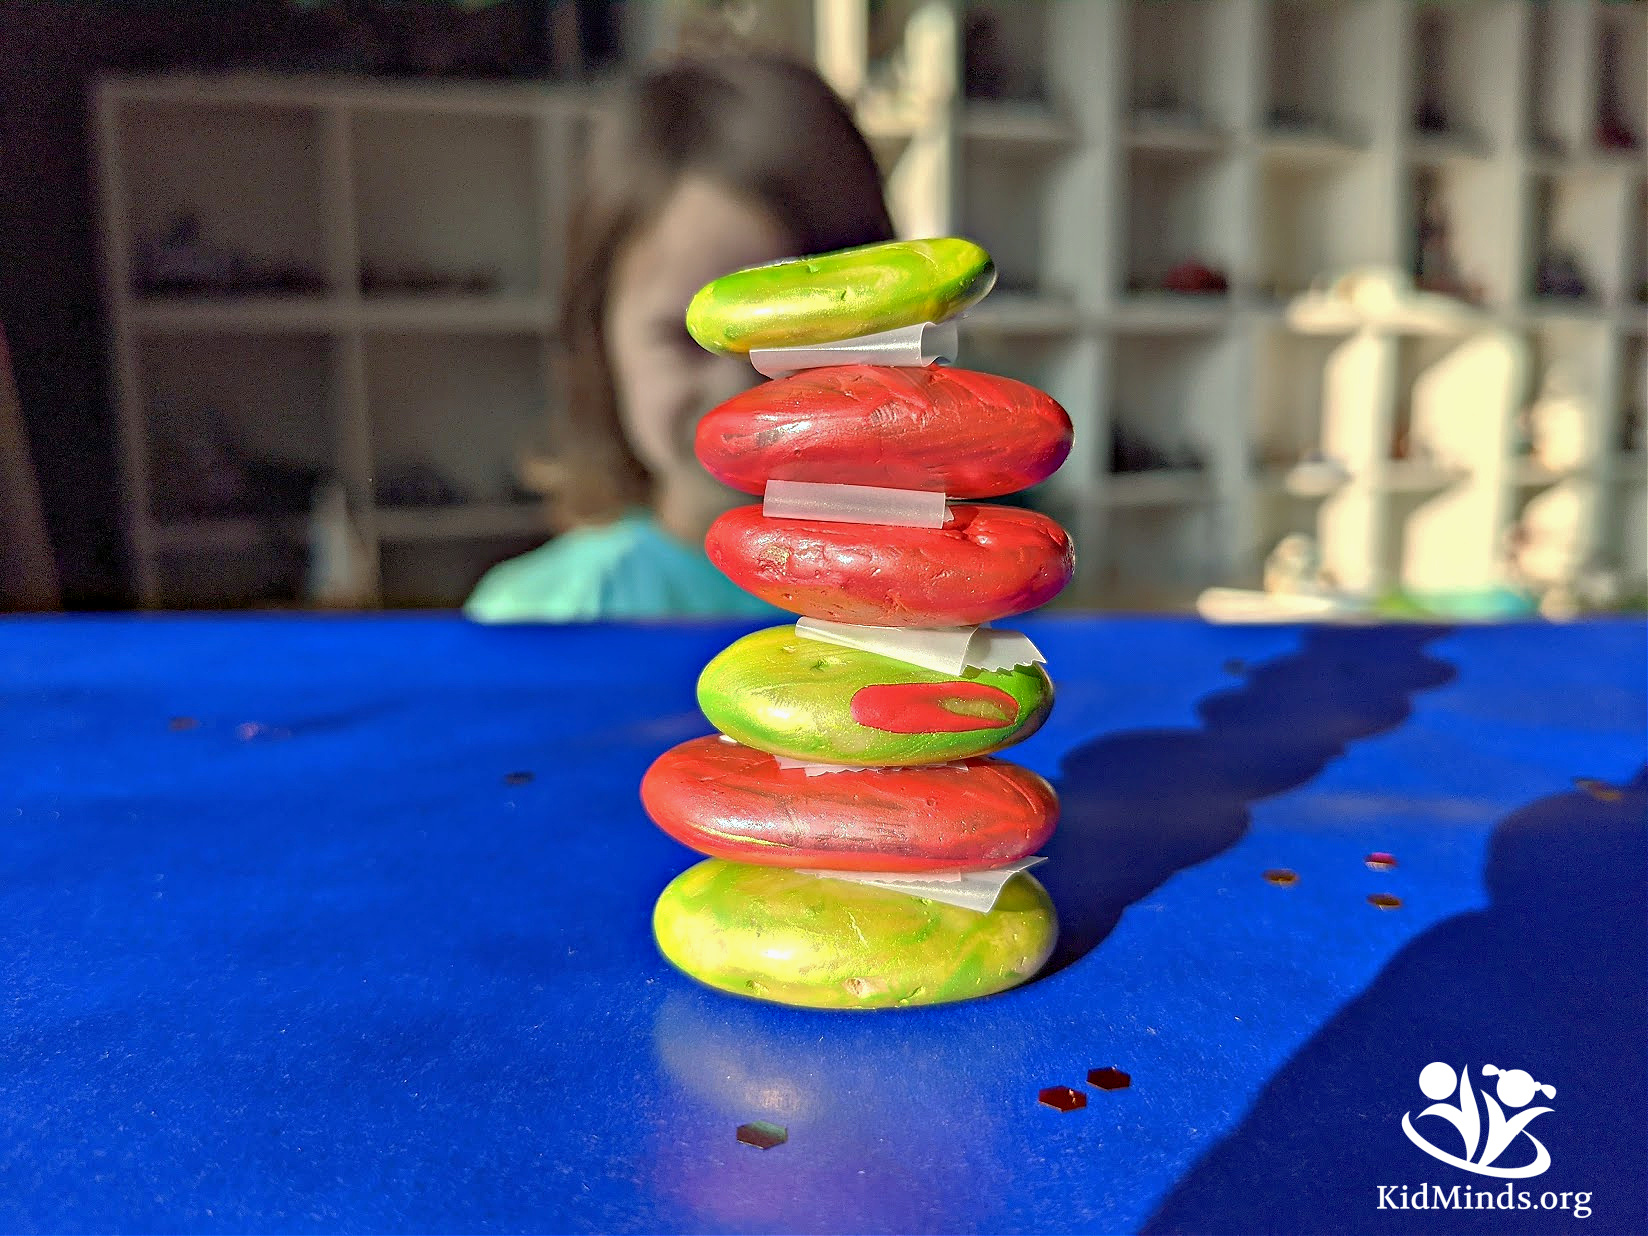 Do this simple activity after reading Dr. Seuss’s Ten Apples Up On Top, and you’ll turn storytime into a STEM lesson. #kidsactivities #DrSeuss #STEM #kidminds #handsonlearning #spring #TenApplesUpOnTop